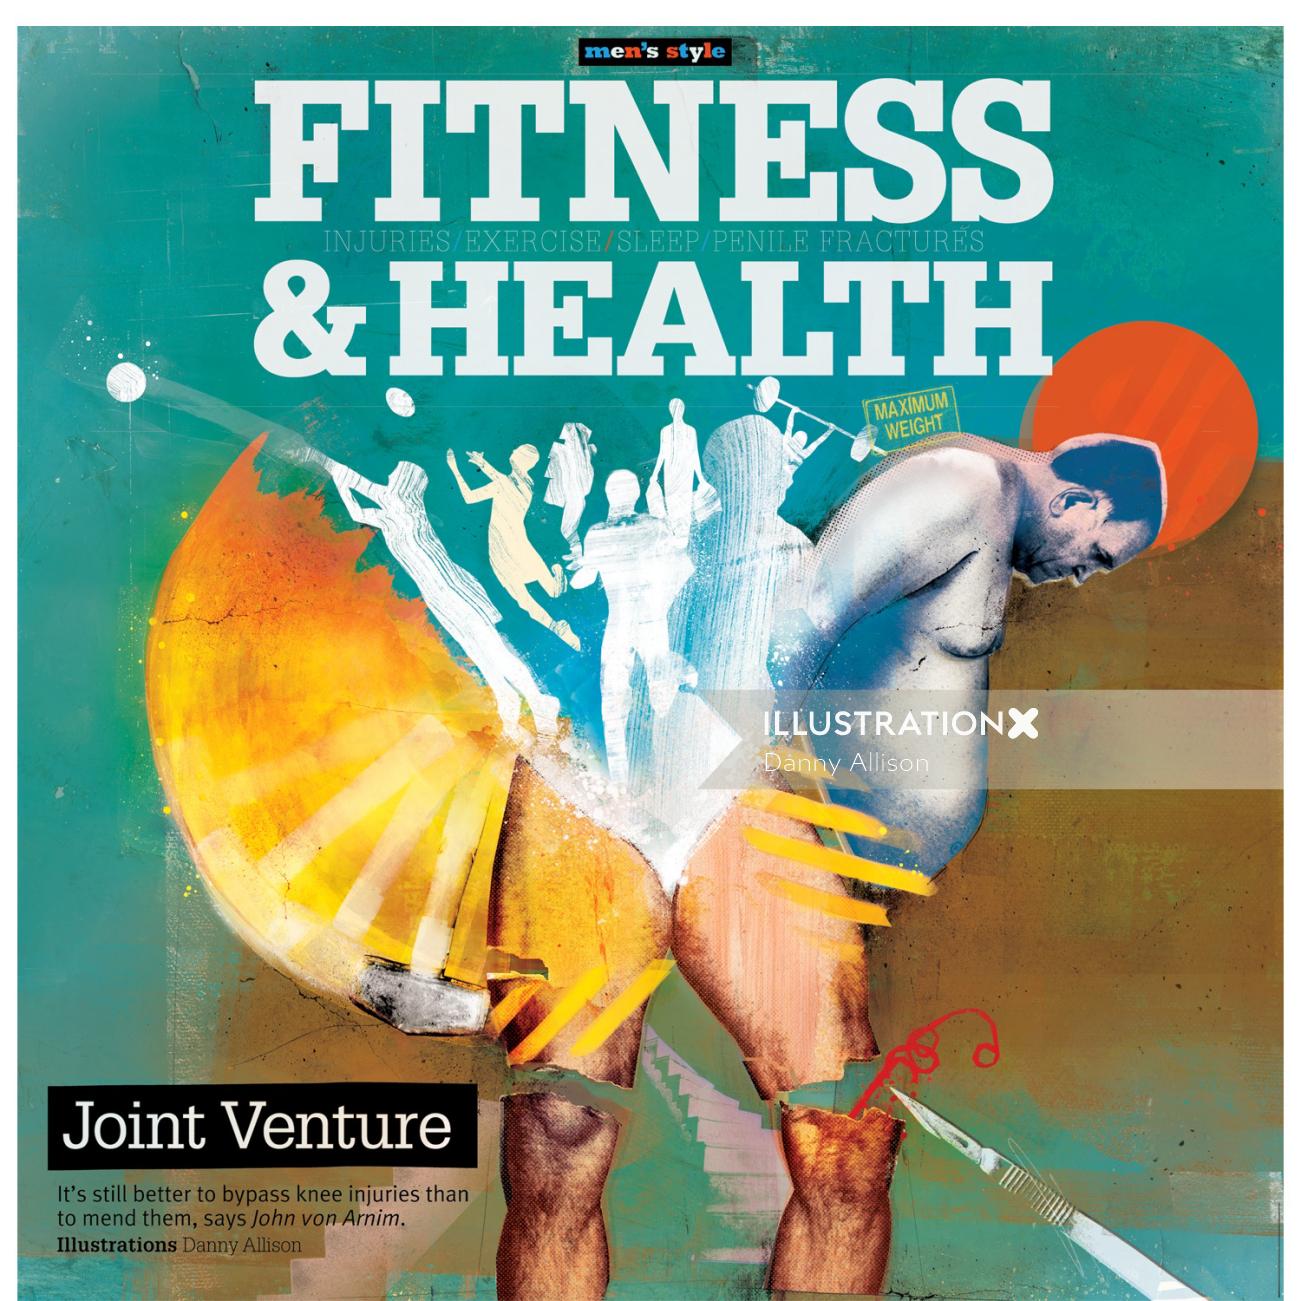 Fitness & Health text, Magazine cover, man standing